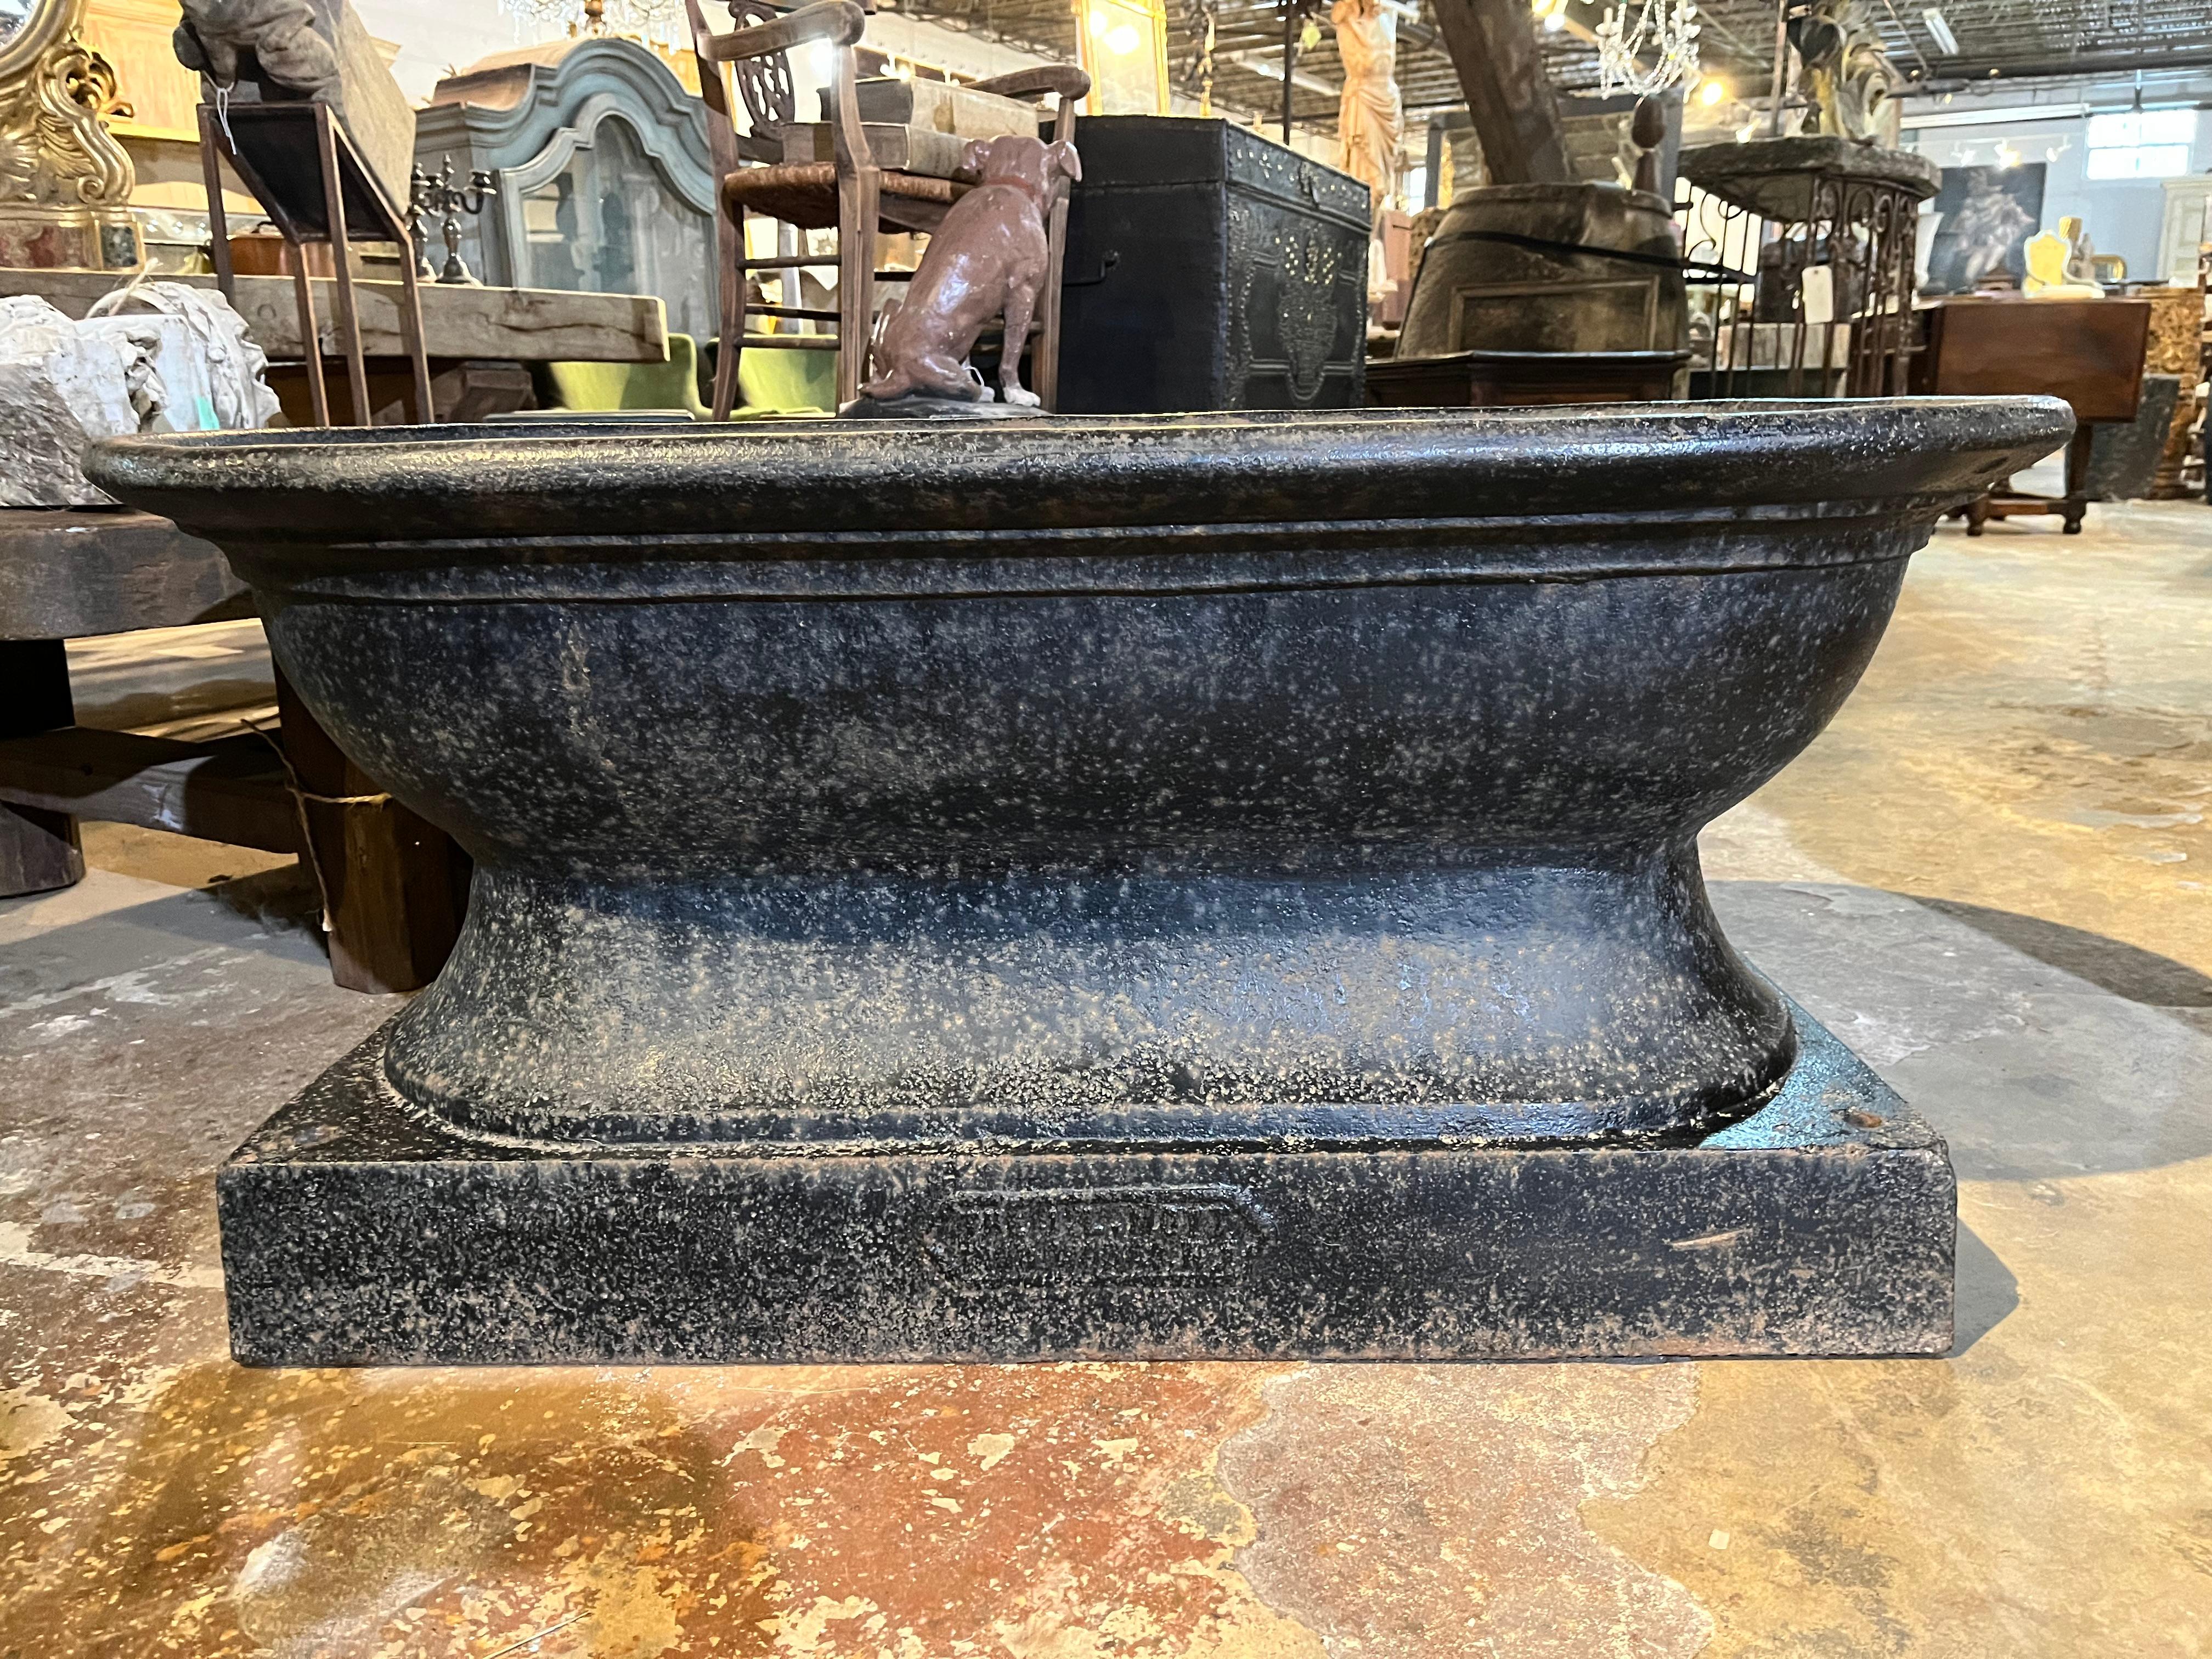 A very handsome later 19th century Horse Trough beautifully crafted in cast iron by JL Mott Iron Works. Wonderful converted into a water feature or as a planter - jardiniere. Wonderful condition and patina.